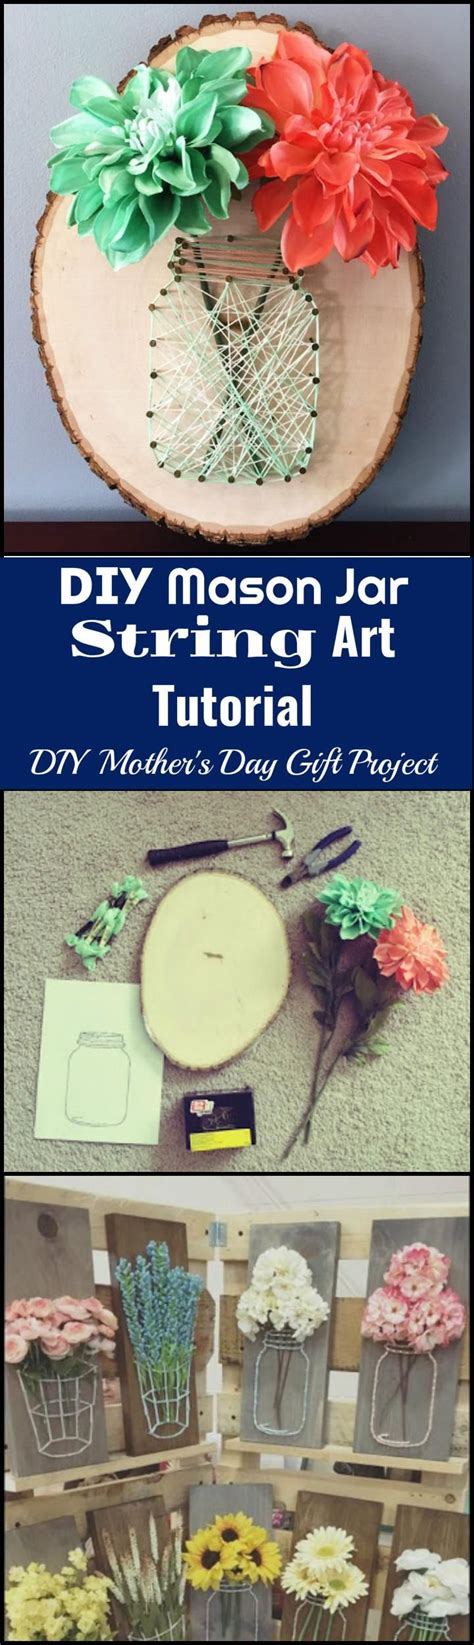 What kind of gifts are your mom and dad going to like? Pin on DIY Gifts for Everyone - DIY